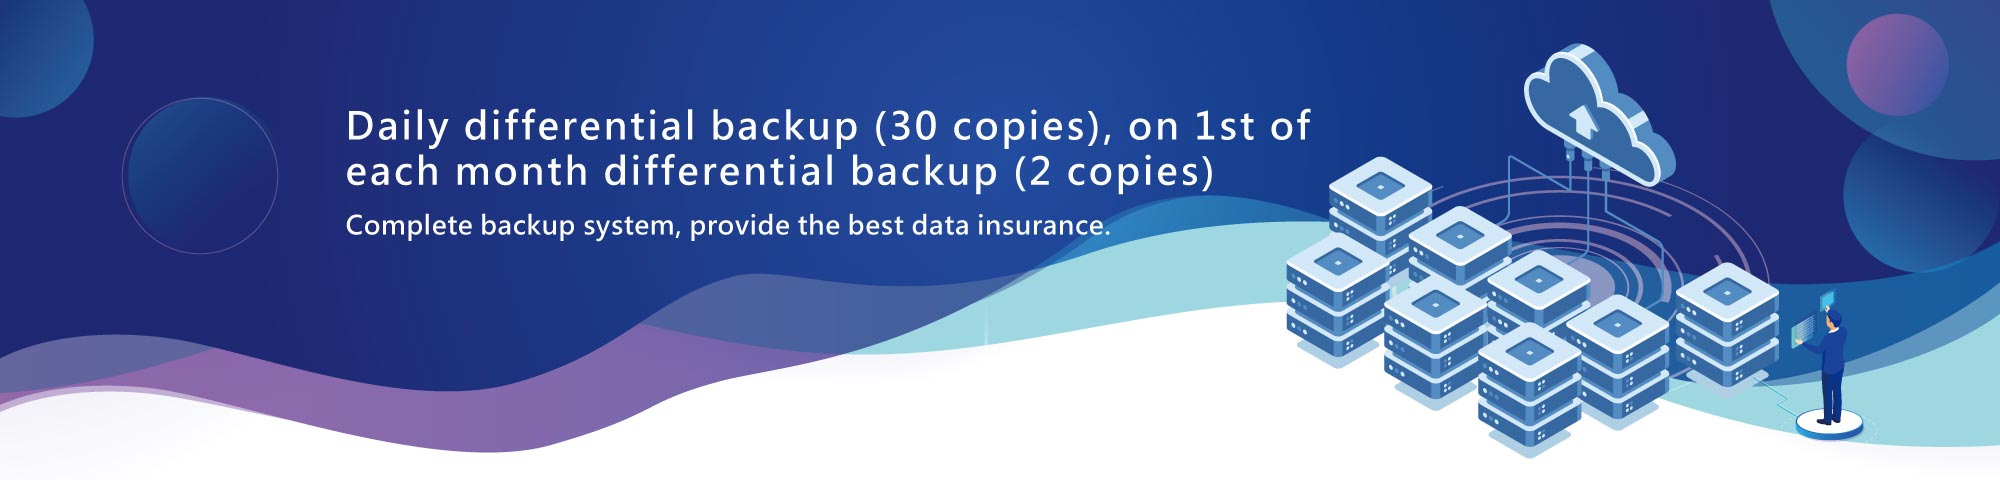 Daily backup (30 copies)month backup(2 copies) ｜遠振